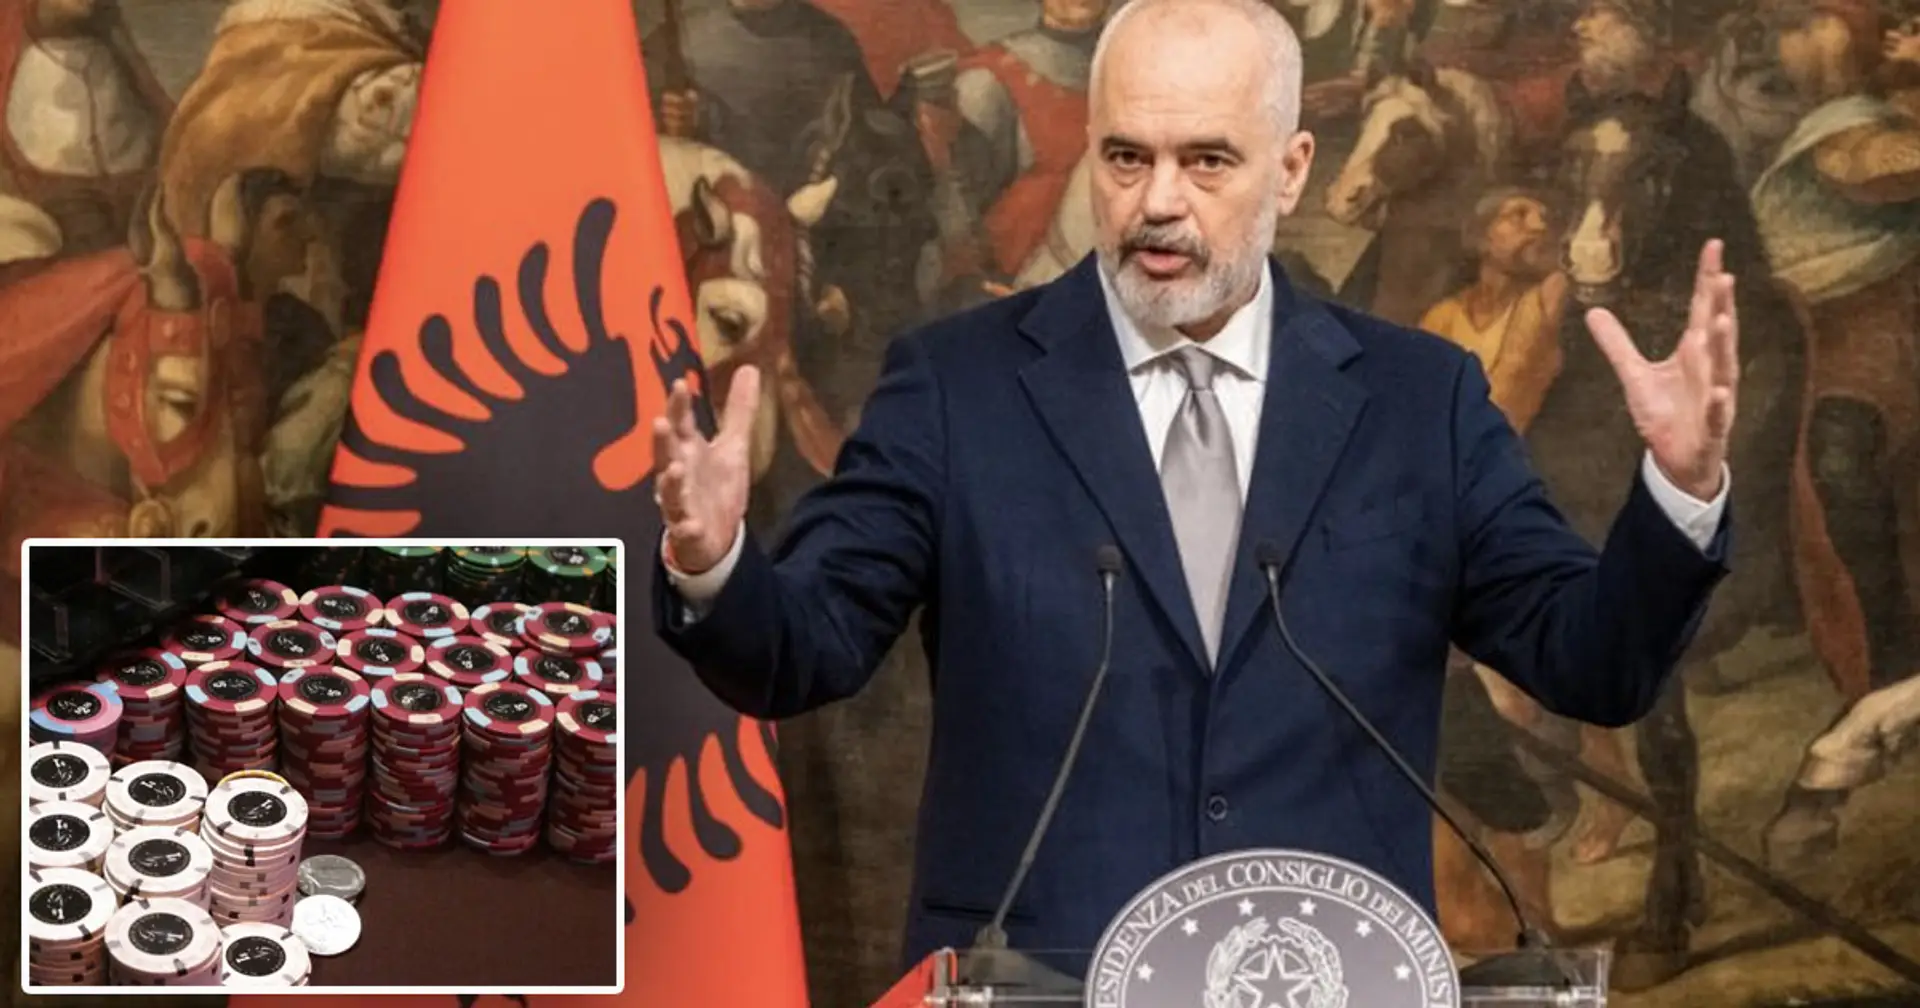 Albania lifts ban on online sports betting, aims to beat illegal bookies